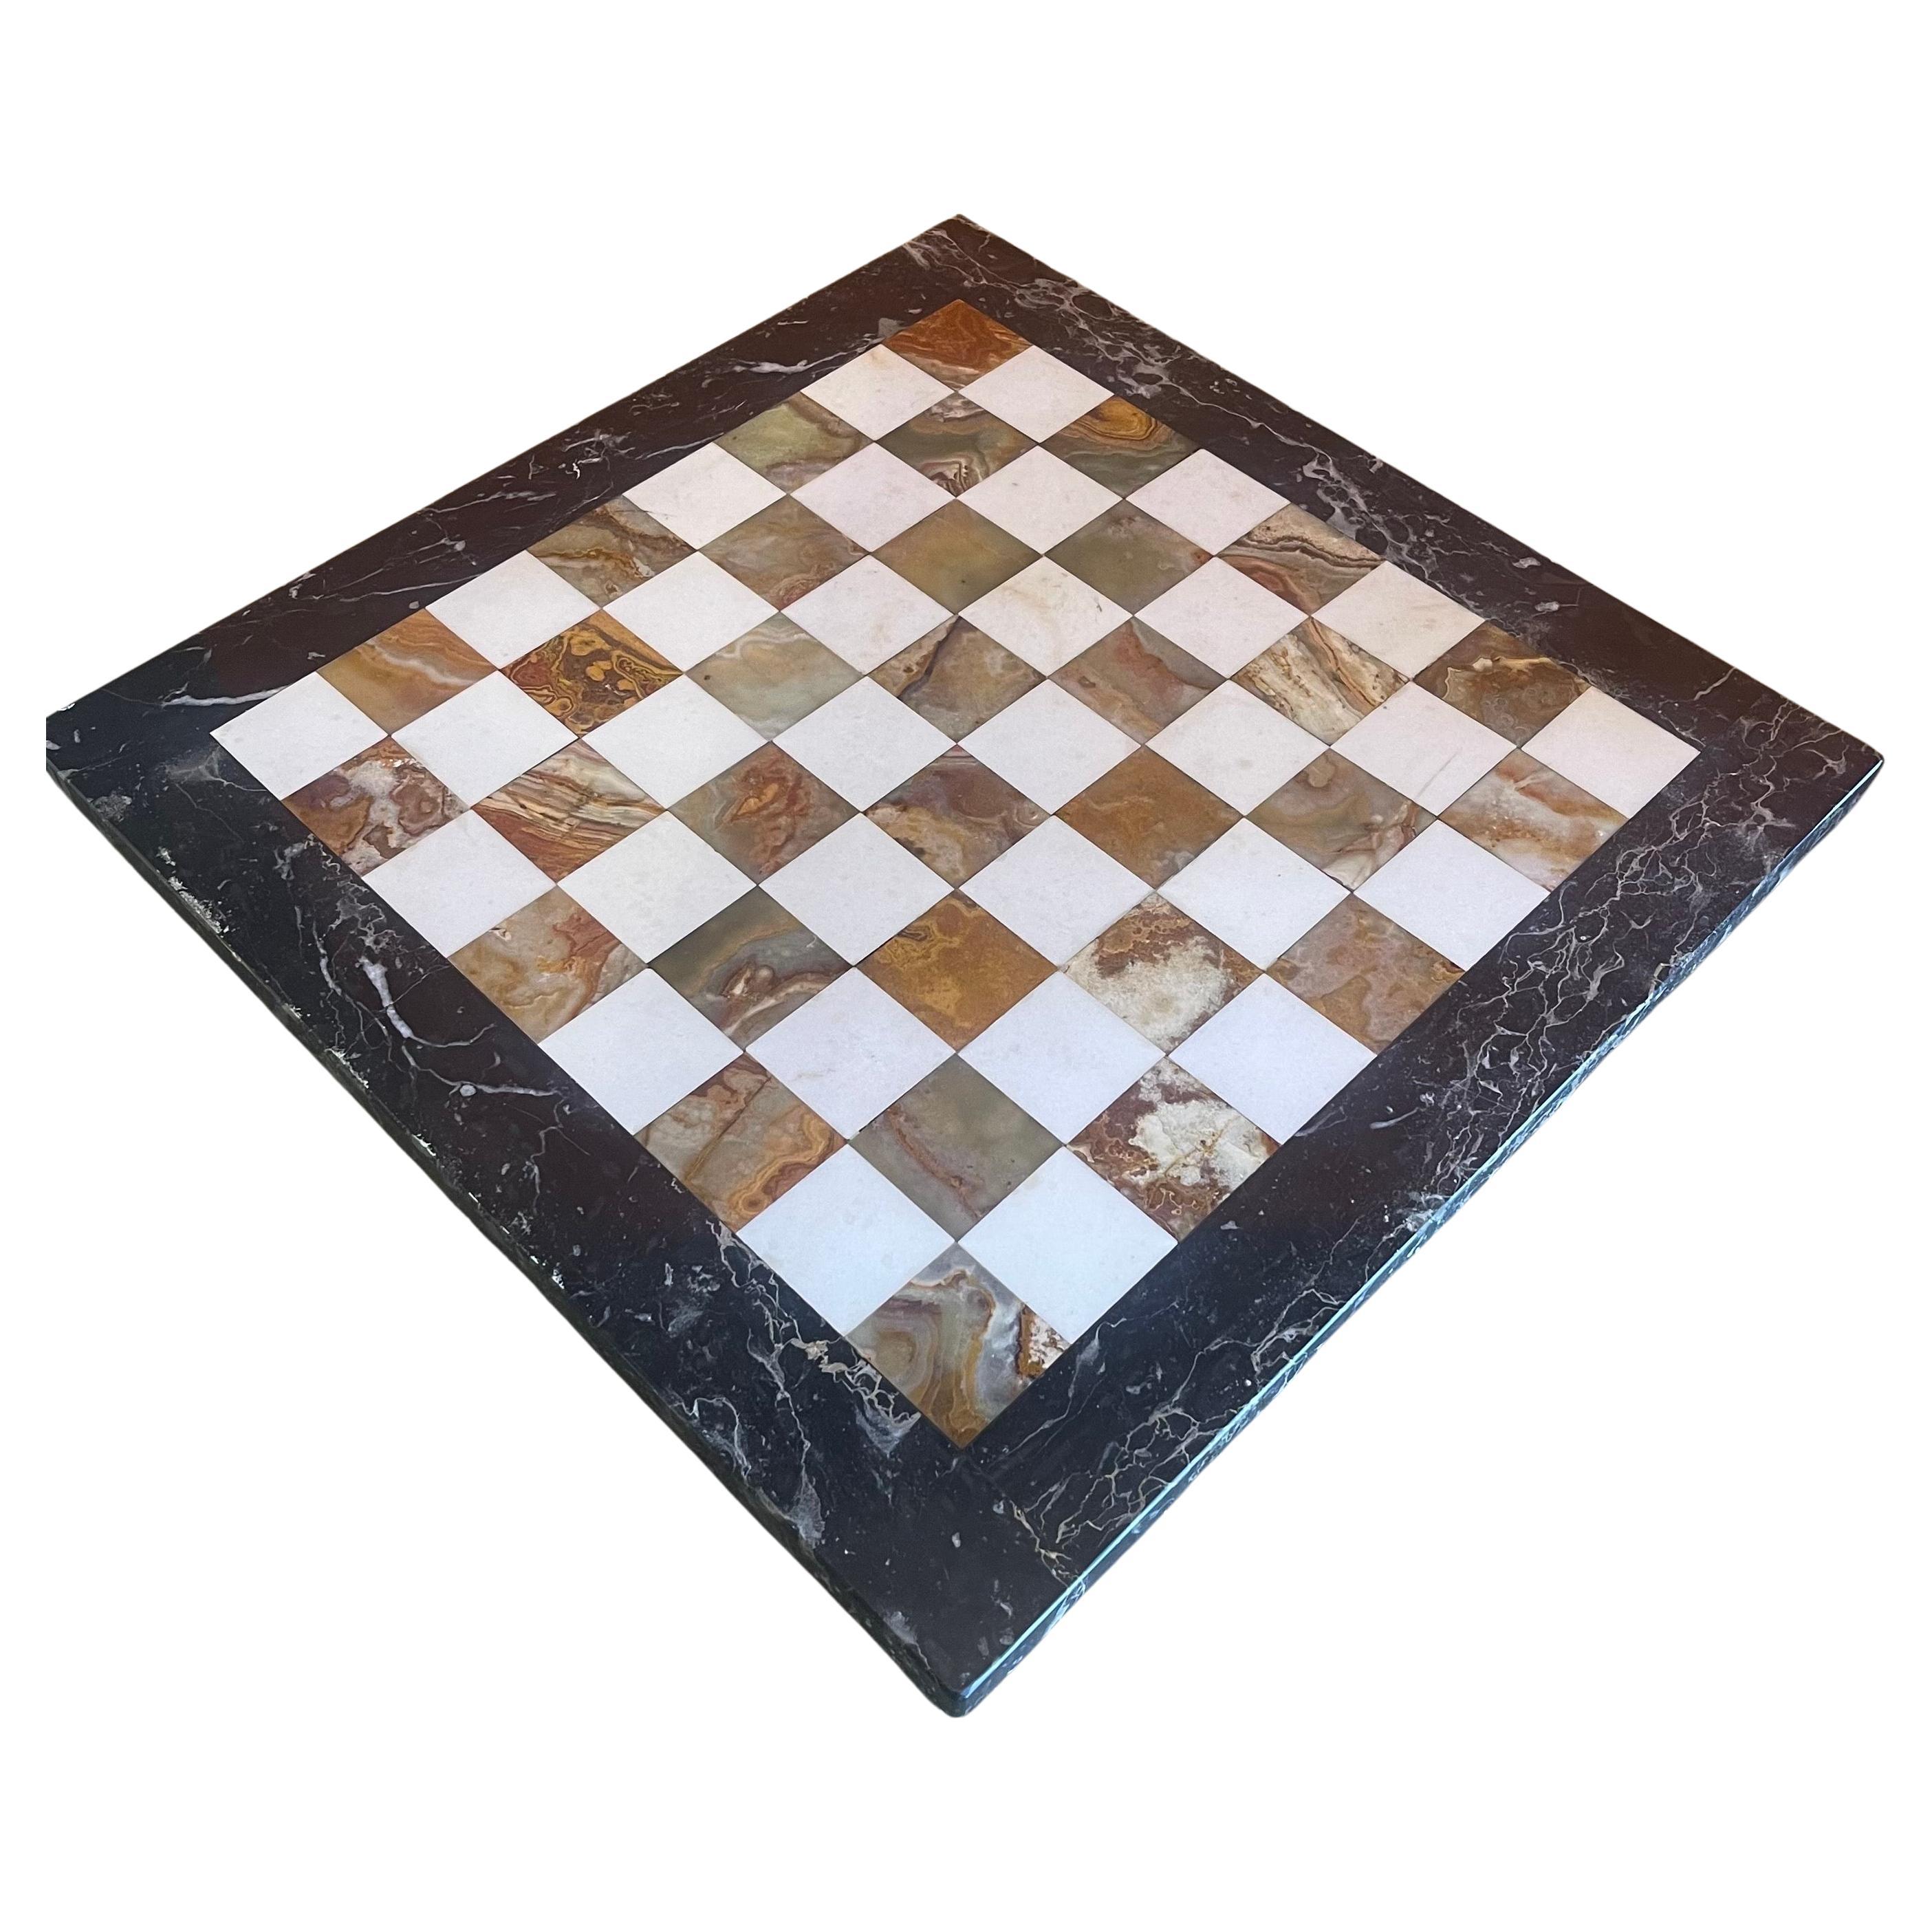 Beautiful vintage marble chessboard, circa 1970s. The board is 2